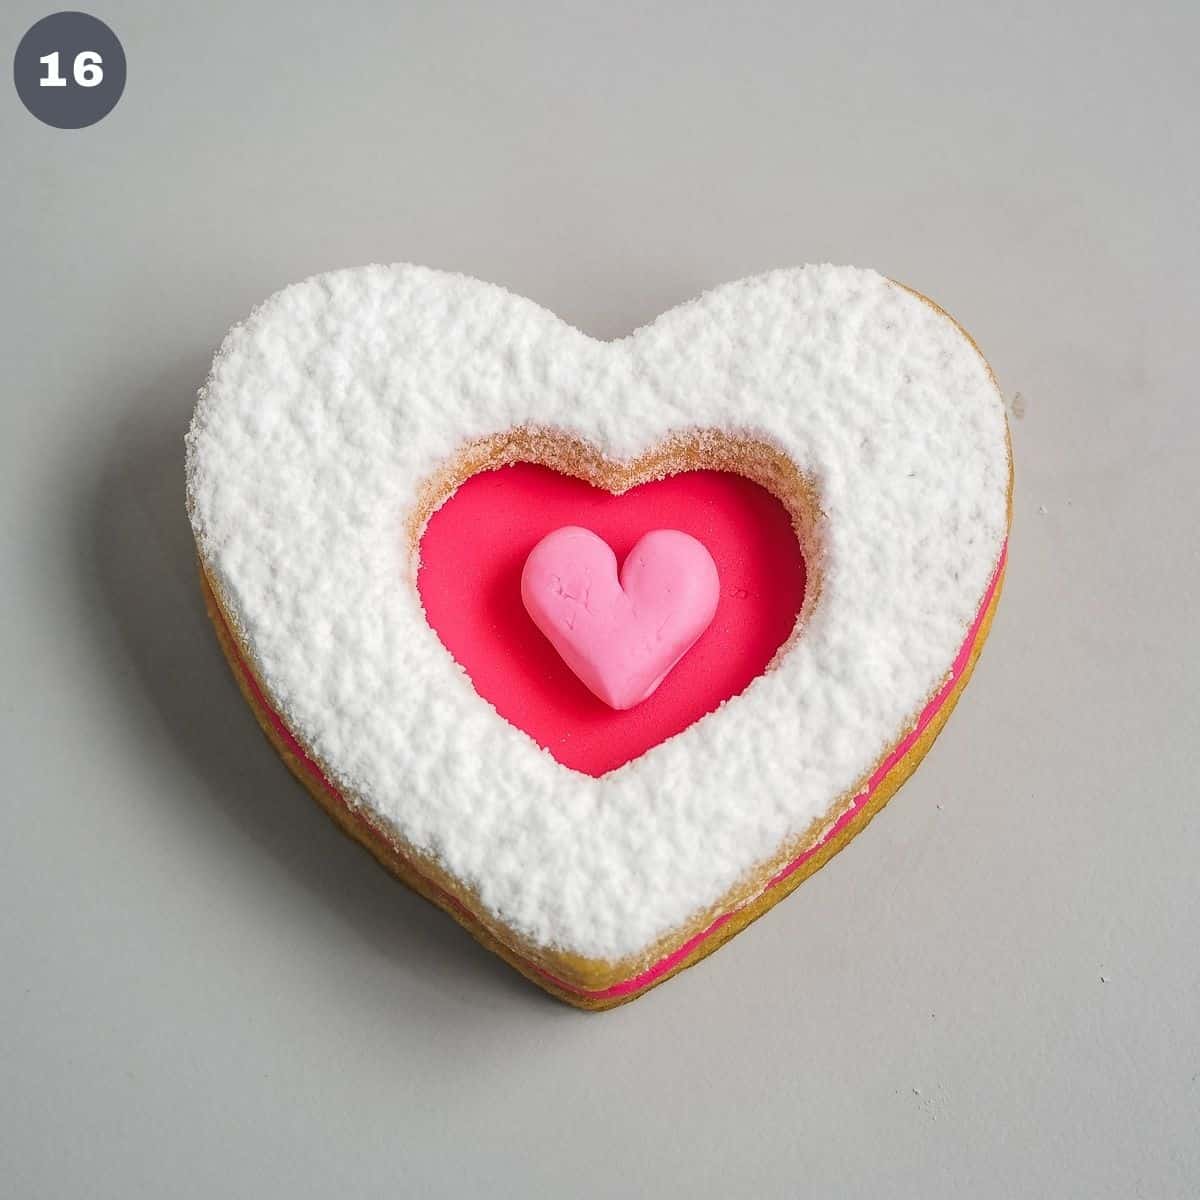 A heart cookie with pink fondant heart center and powdered sugar topping.